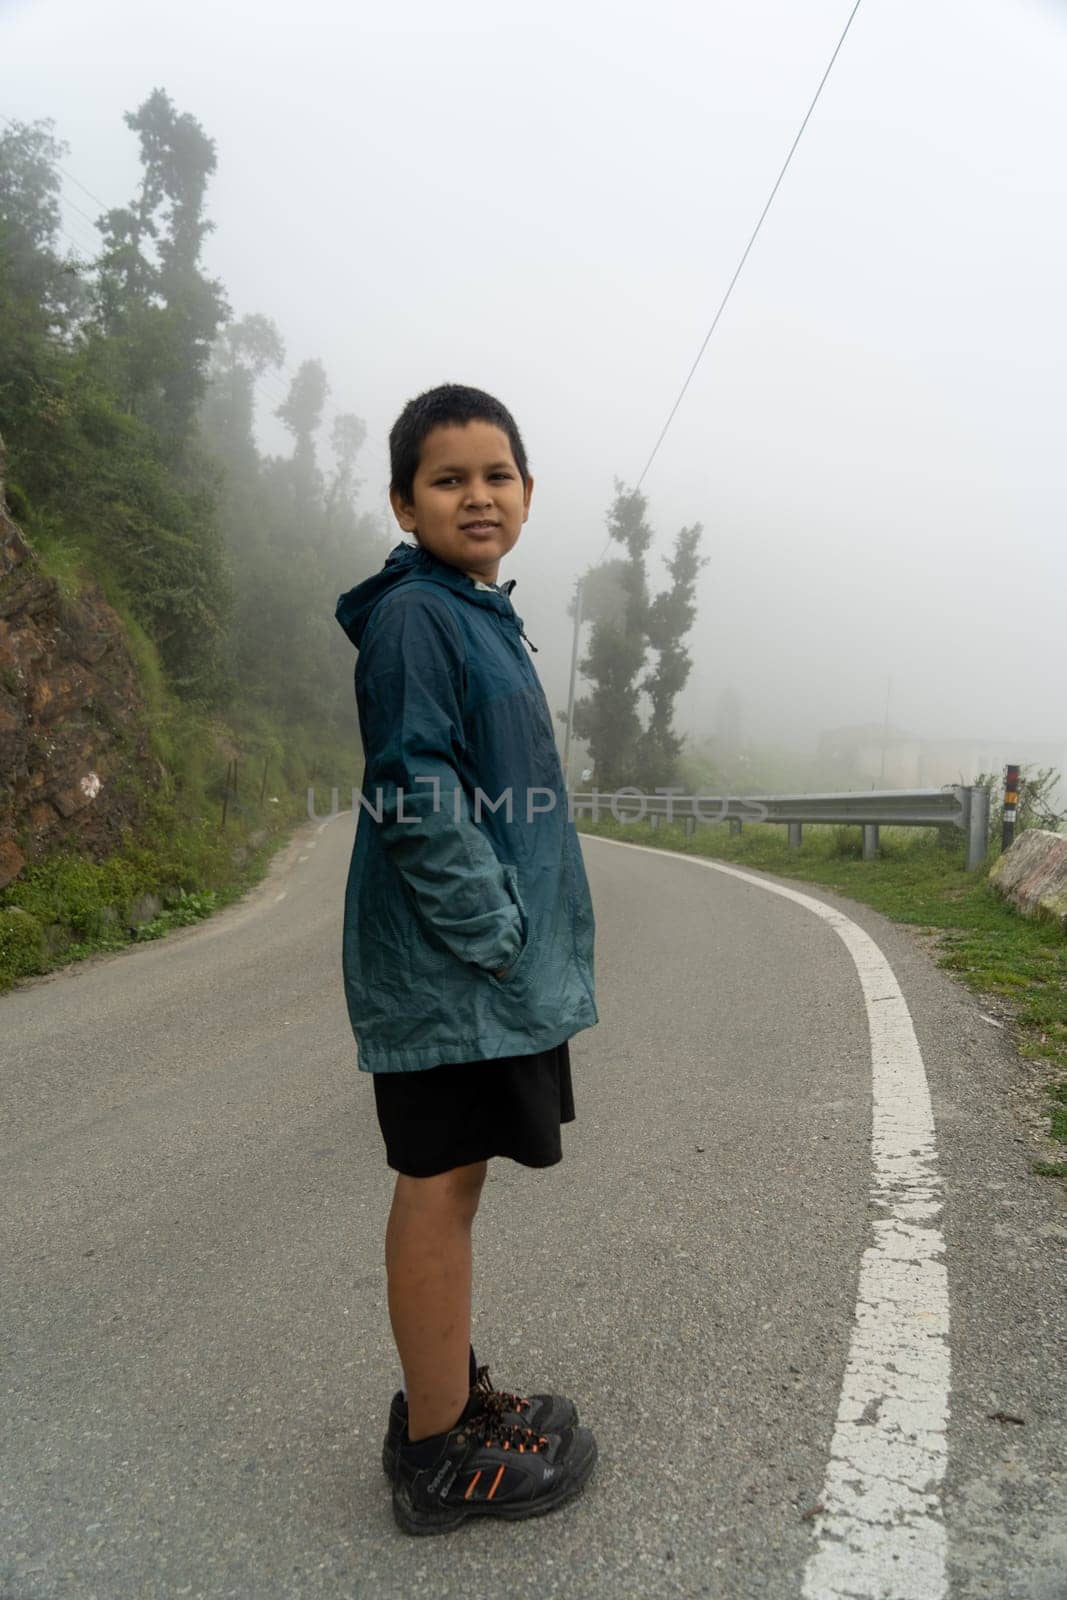 In the picturesque landscapes of Uttarakhand, a young boy stands by the roadside, his journey unfolding against the backdrop of scenic beauty.